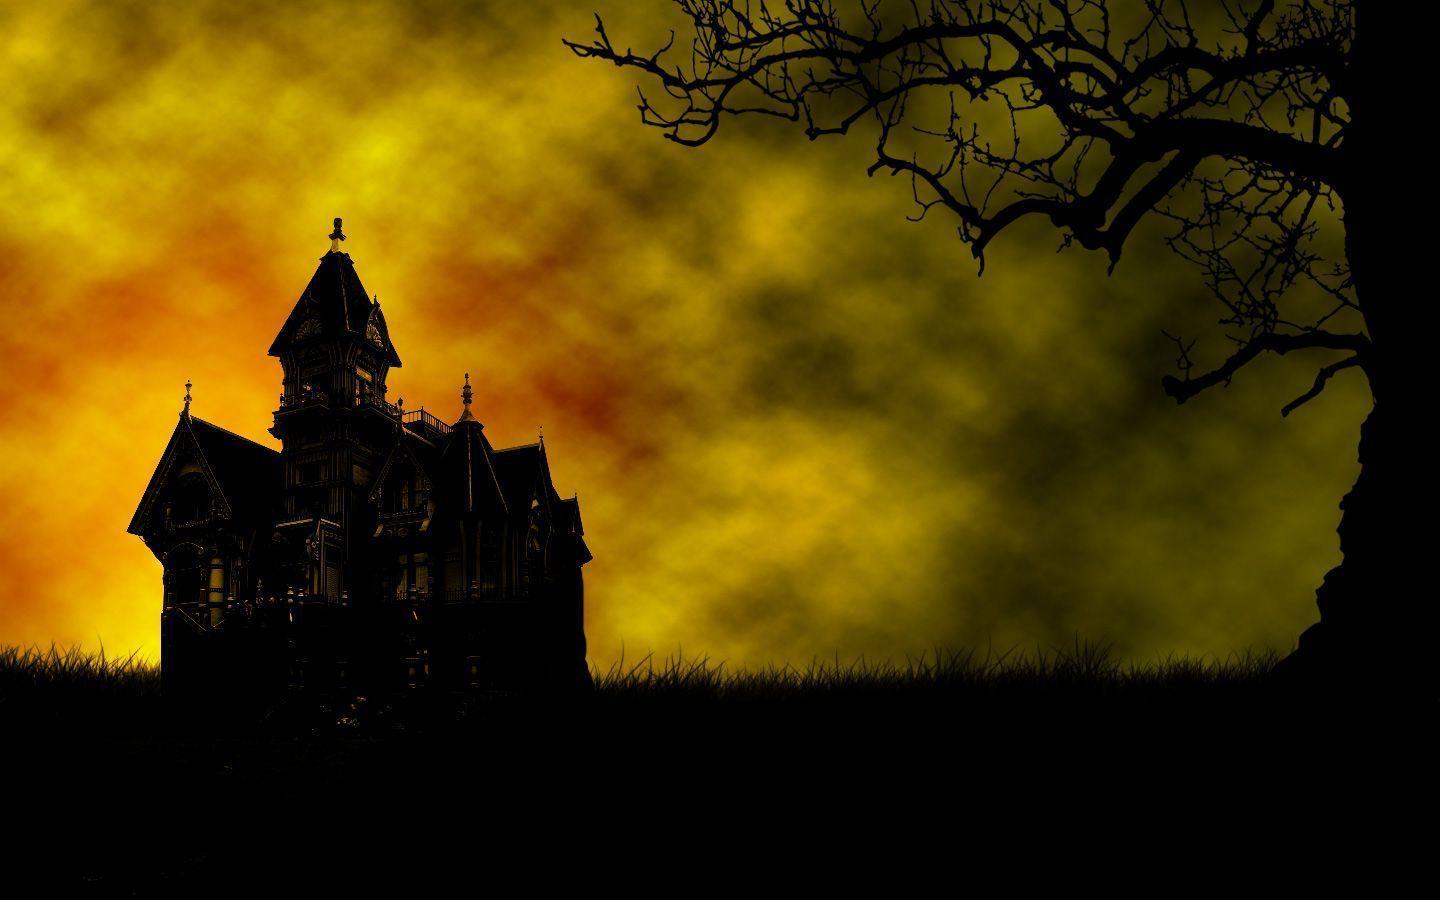 Wallpaper For > Spooky Halloween Background